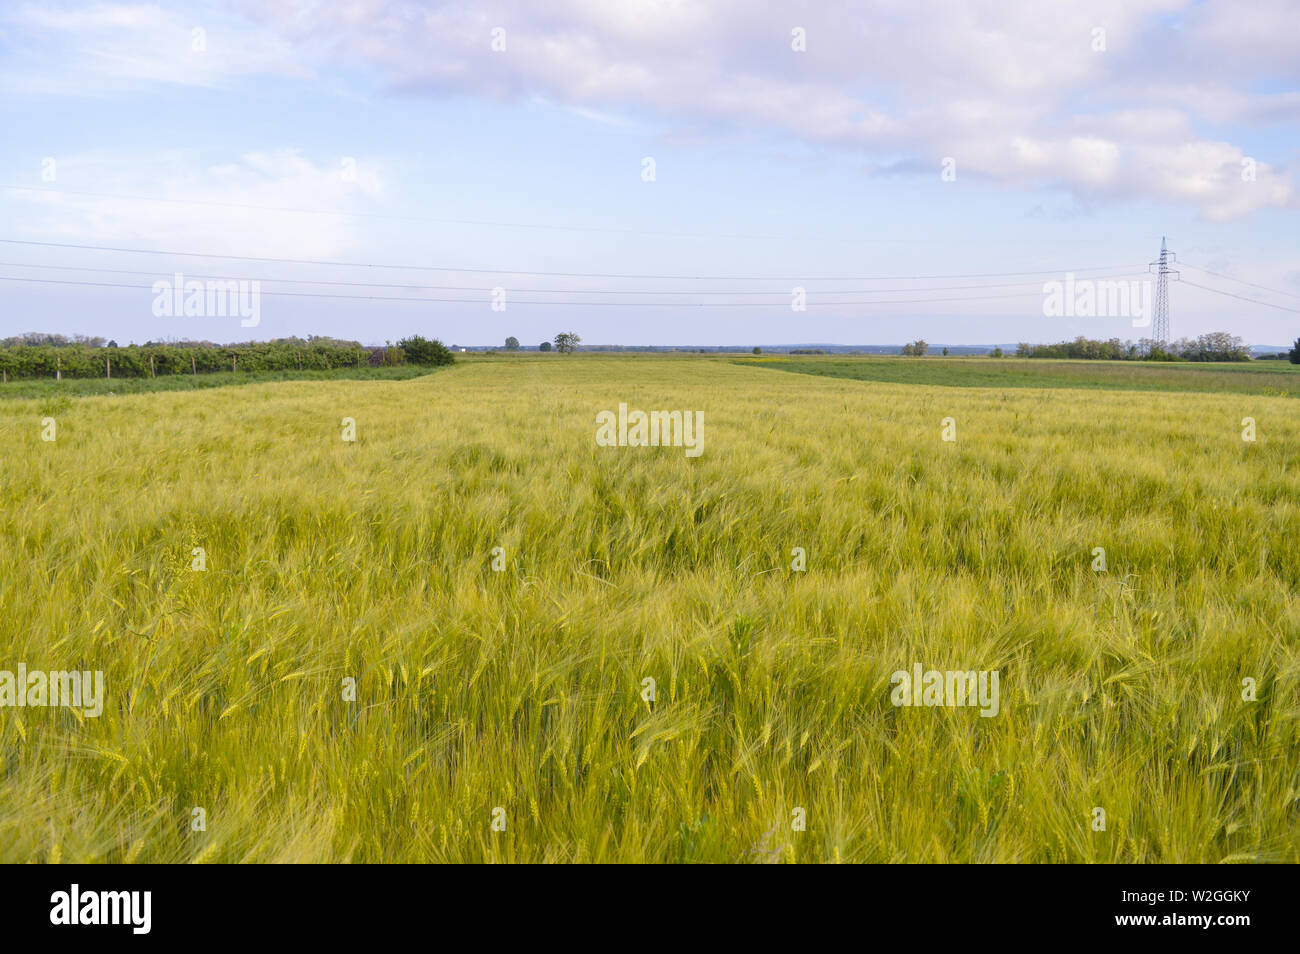 Wheat field landscape on sunny spring day Stock Photo